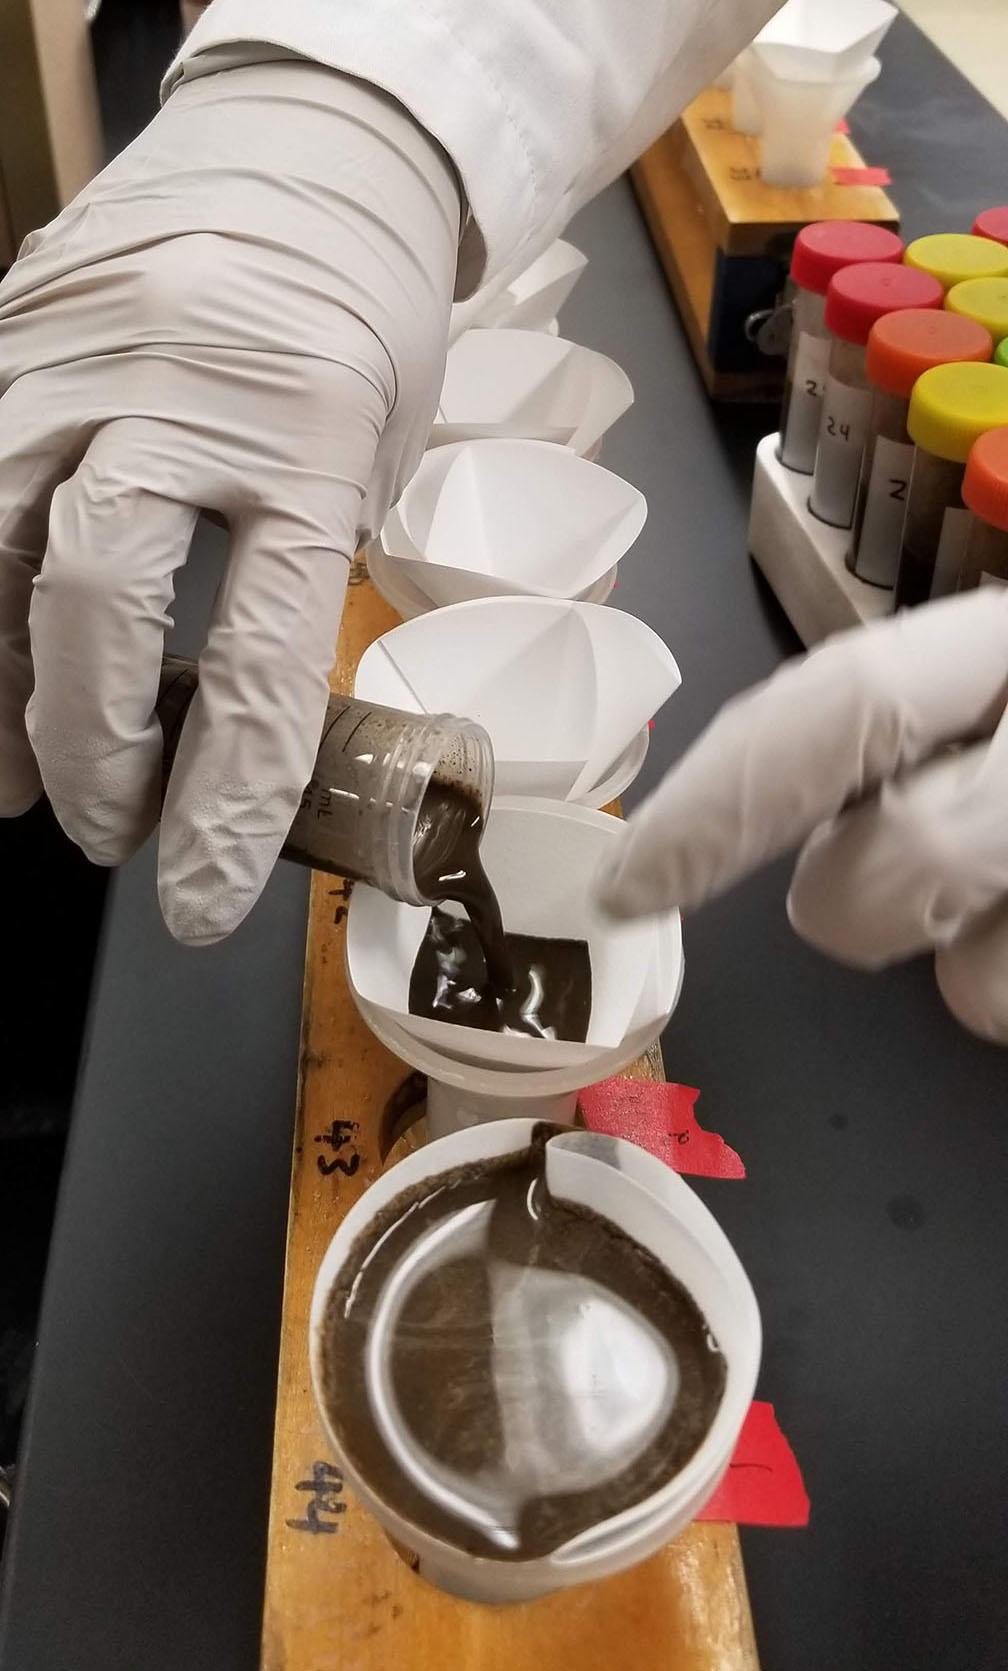 A technician in white lab coat and gloves pours black substance into row of white cups